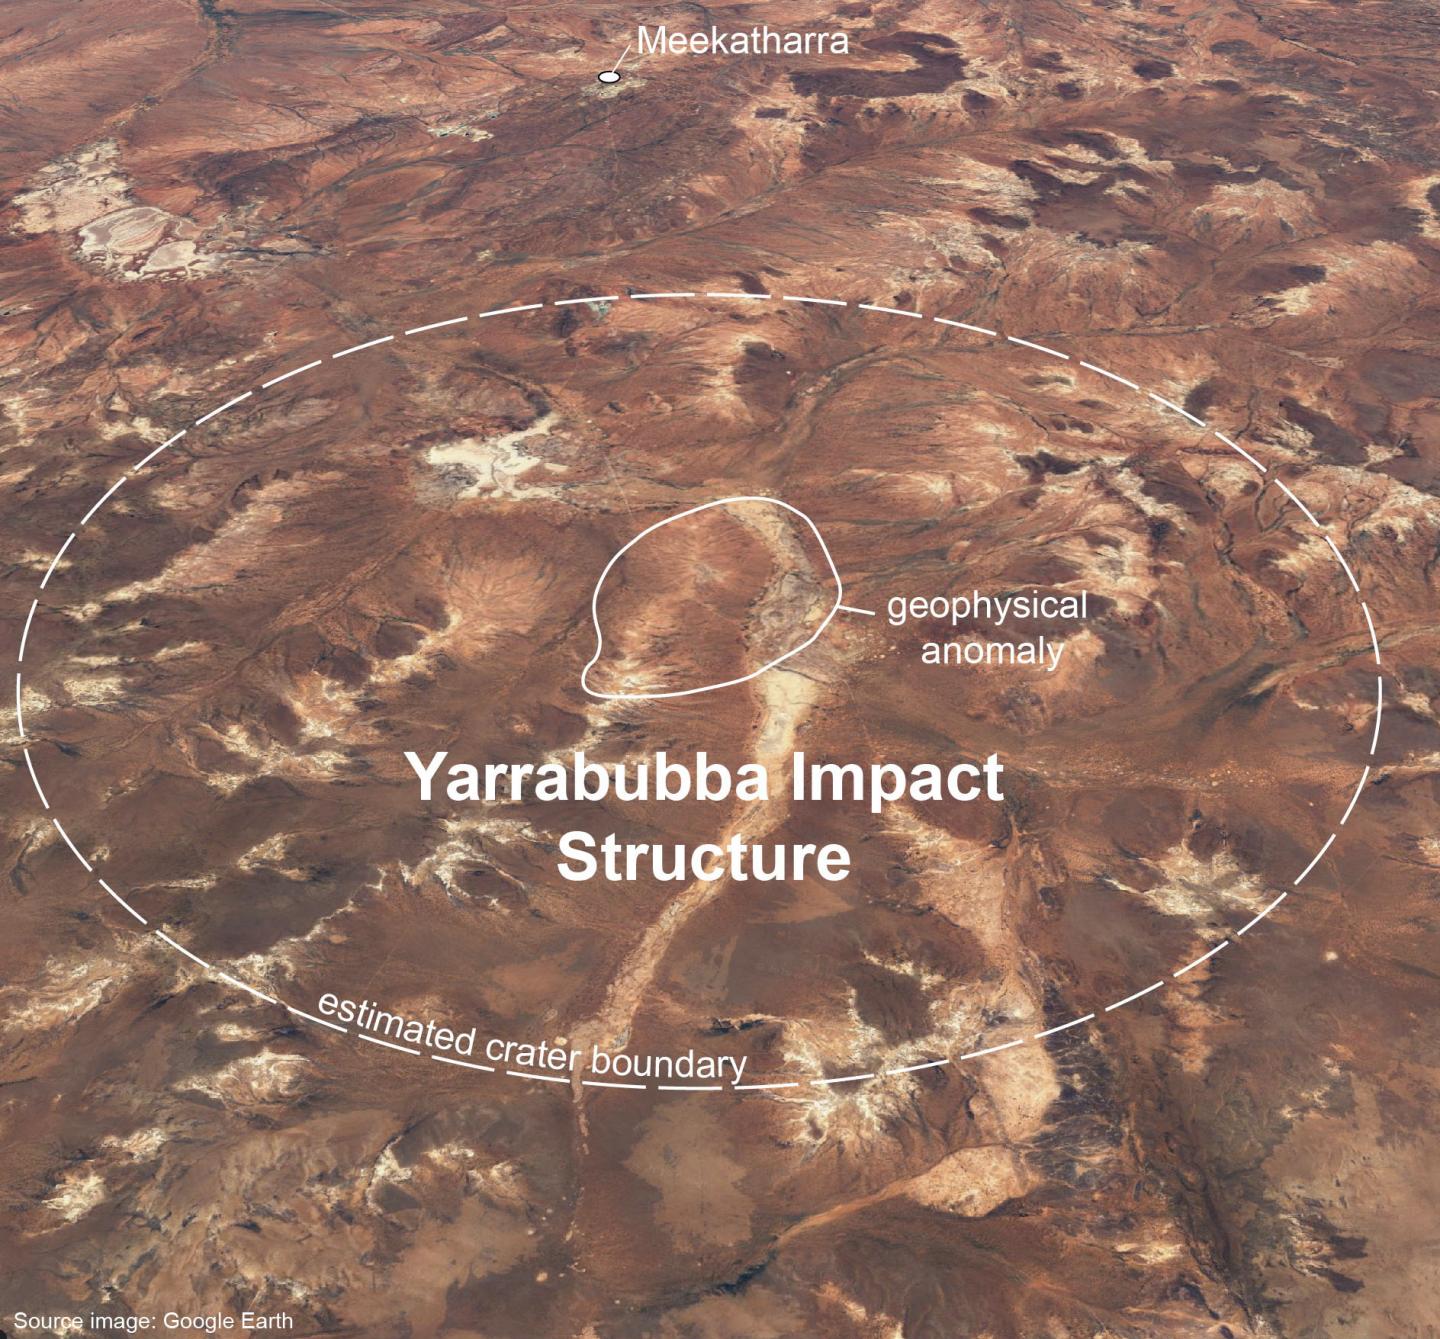 The Yarrabubba Impact Structure